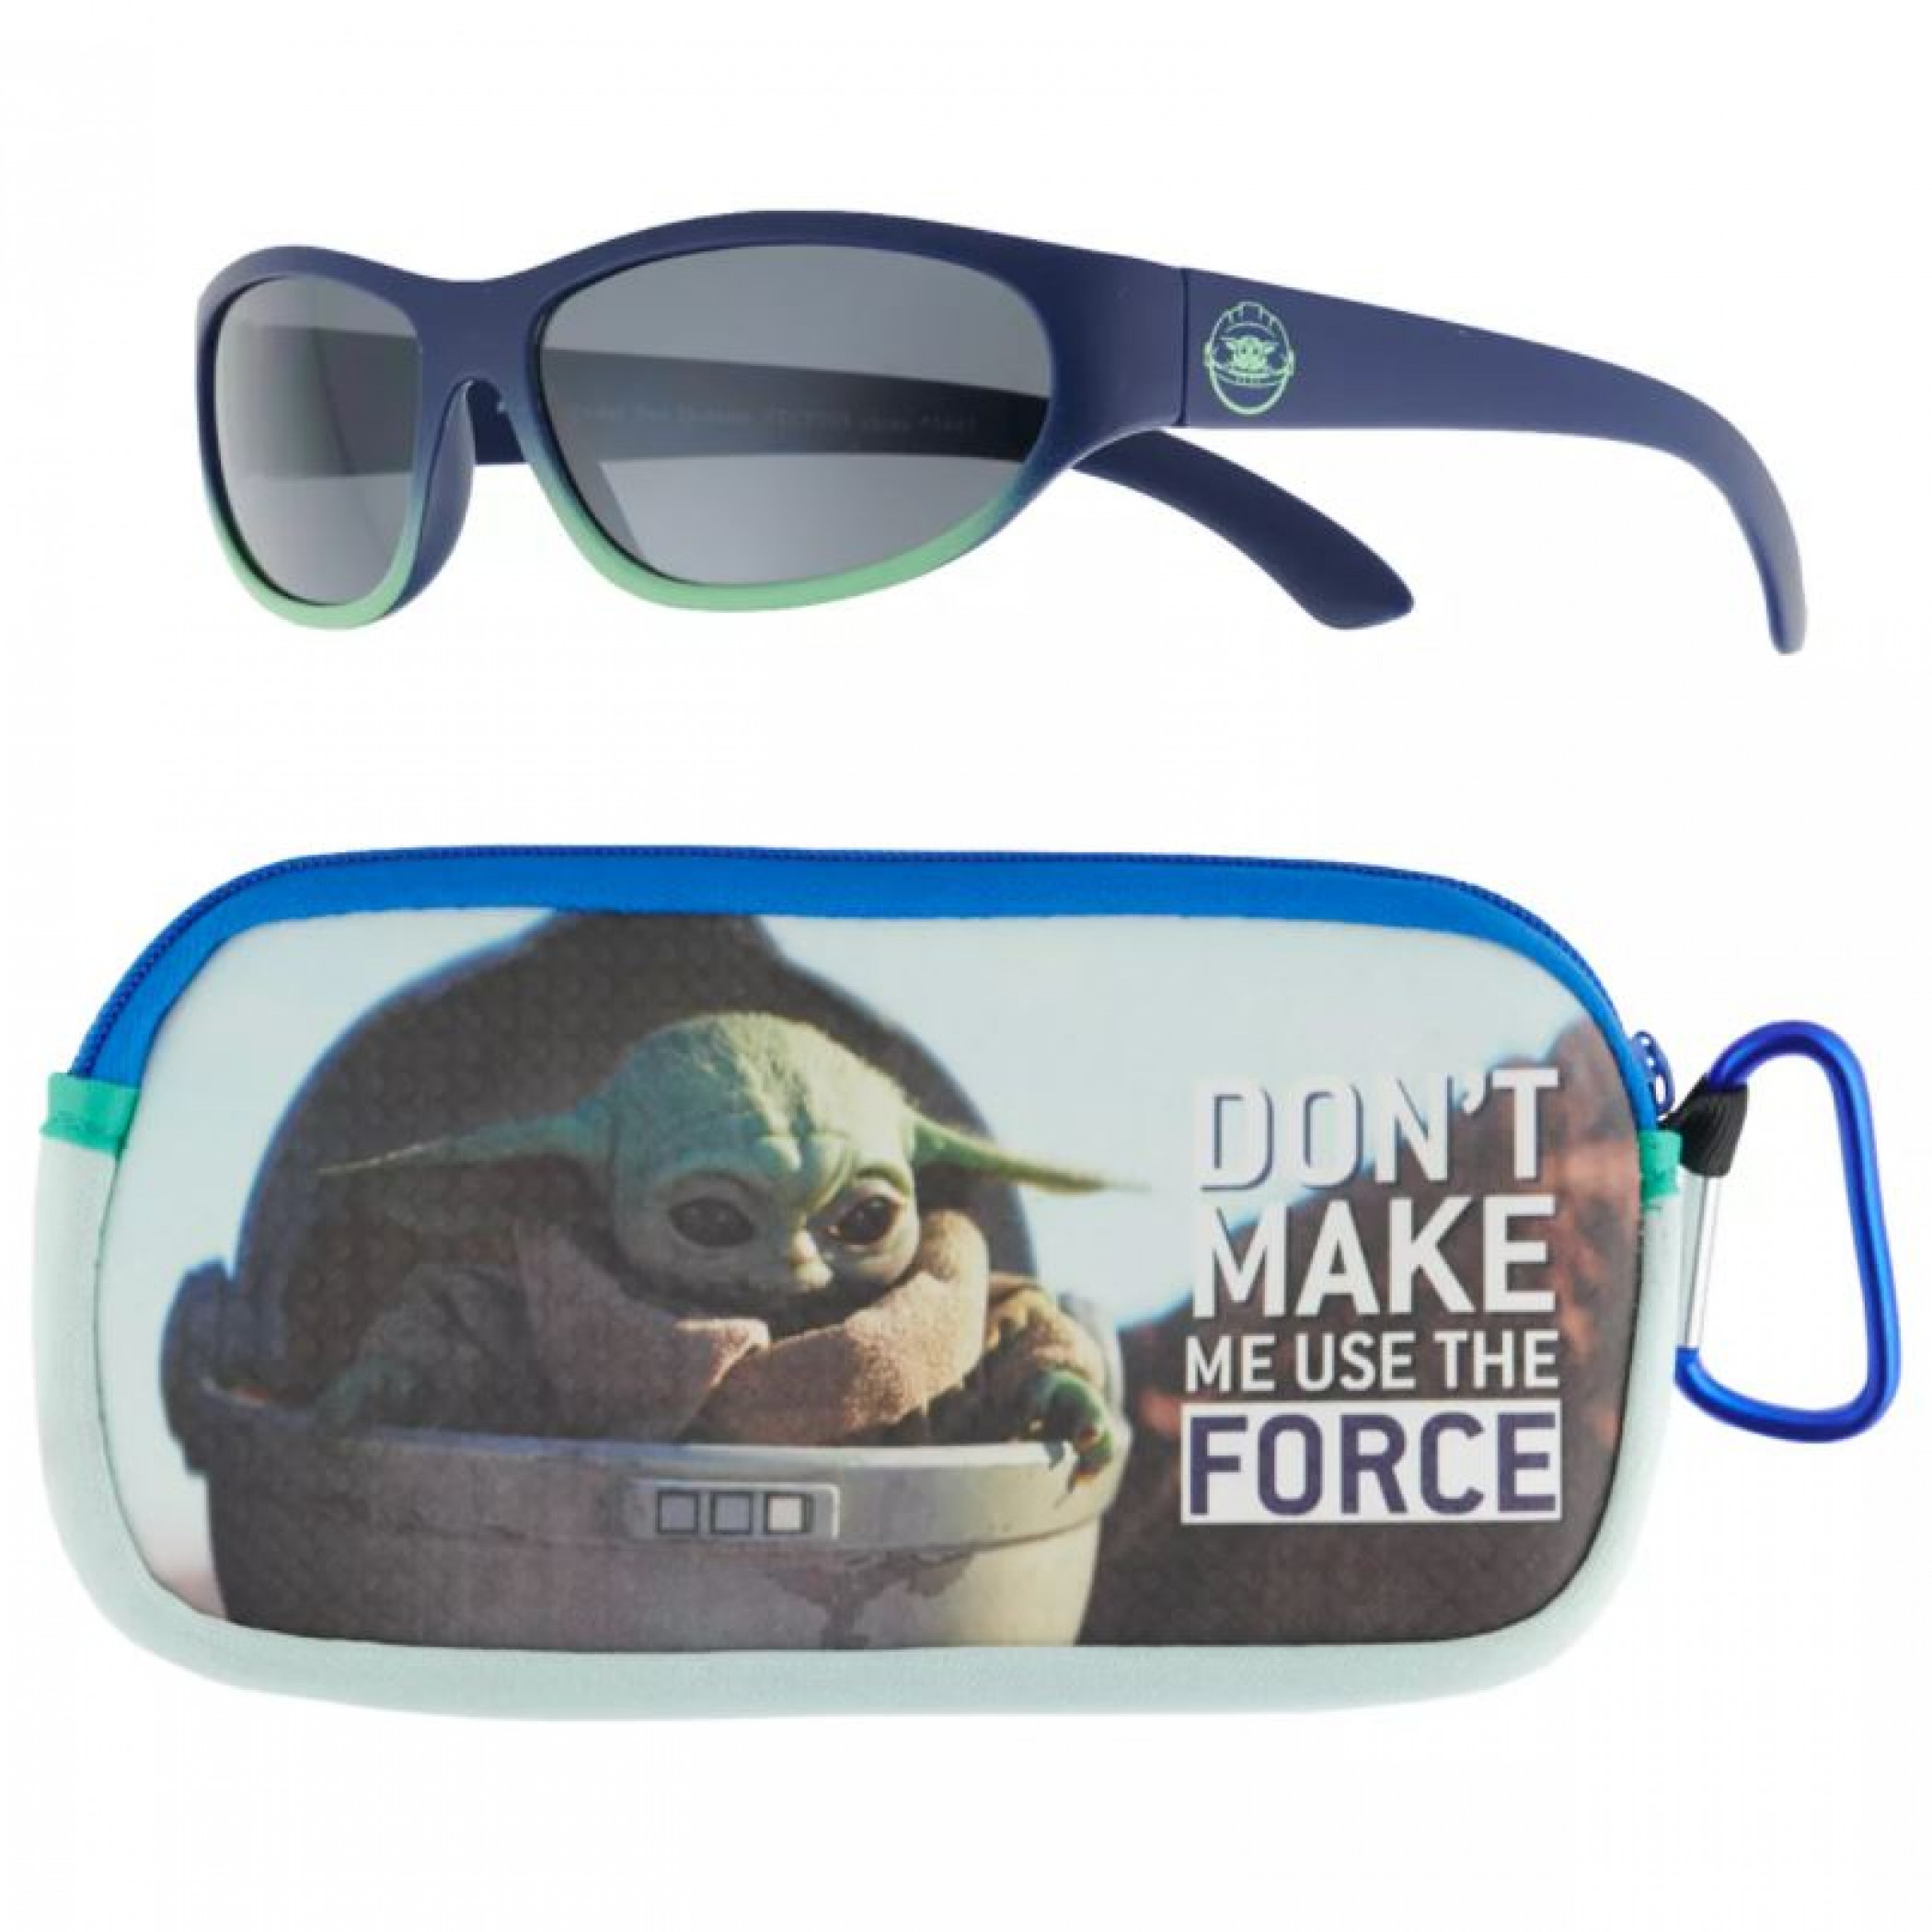 Star Wars The Child Grogu Kids Sunglasses with Carabiner Pouch